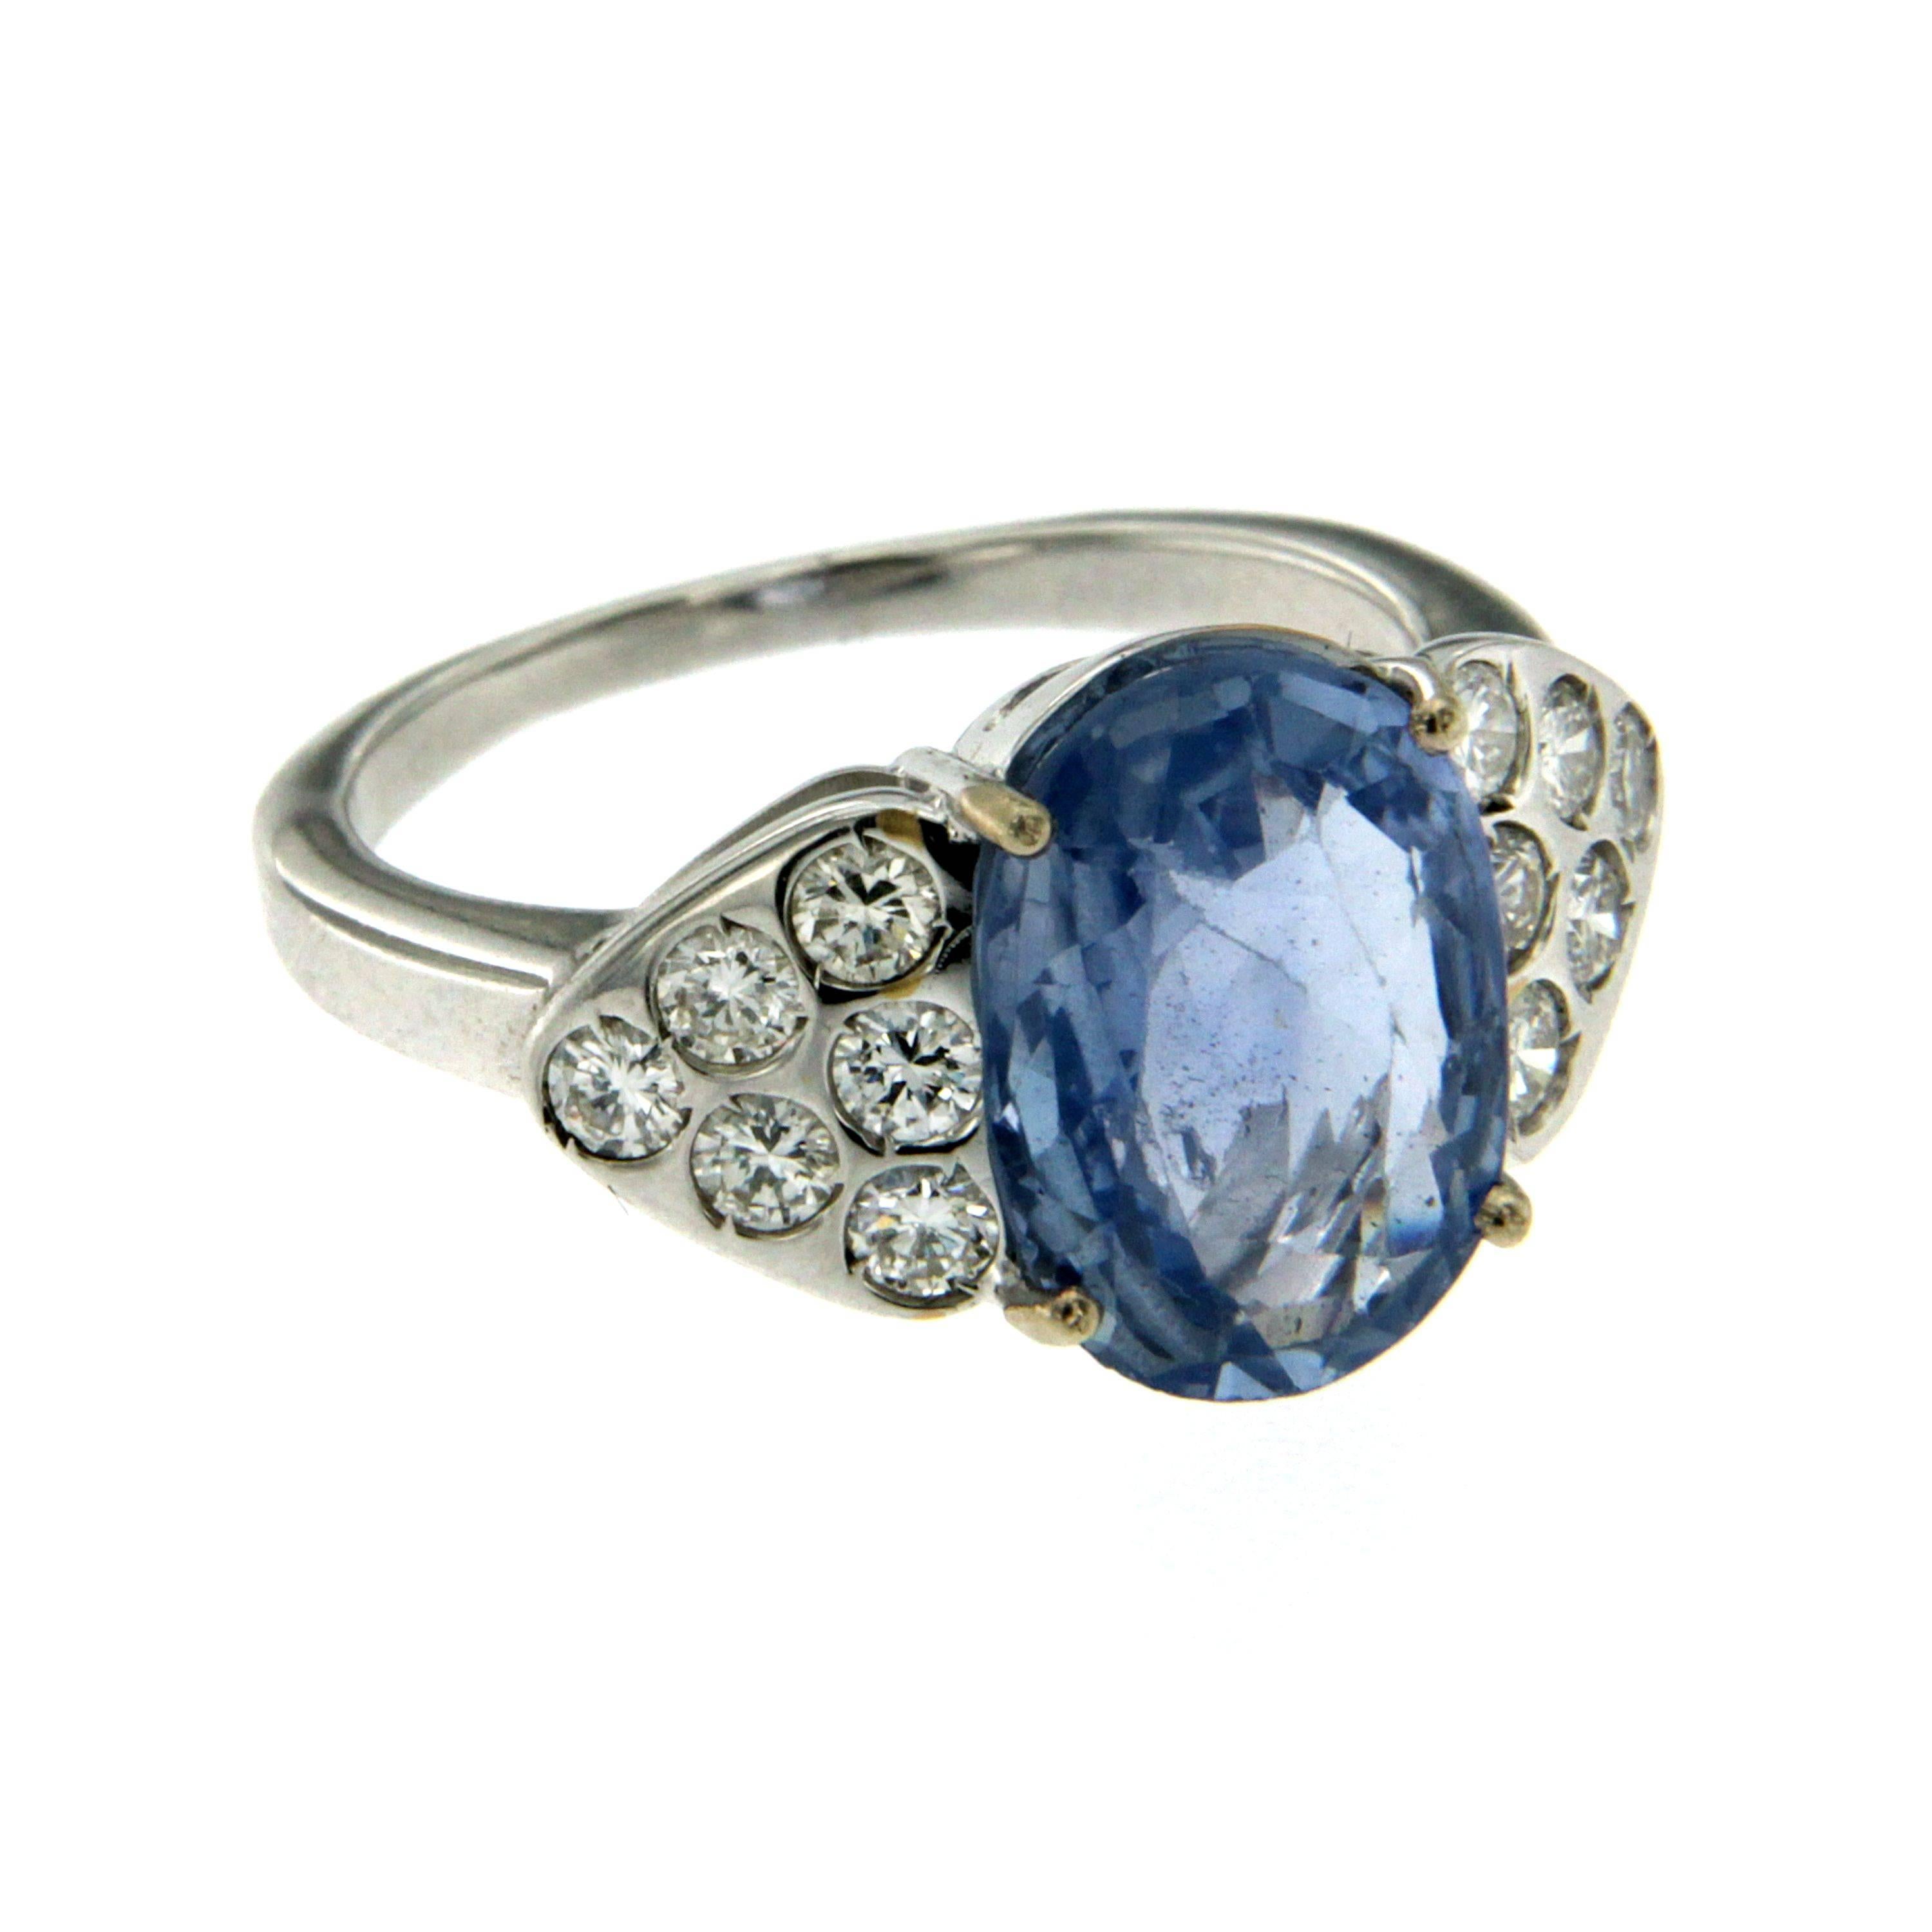 A beautiful sapphire and diamond ring, set with an oval cut Ceylon Sapphire, weighing approx. 3.50 cts  embellished with round brilliant cut diamonds, weighing approx. total of 0.75 cts. Mounted in 18k white gold. 

CONDITION: Brand New
METAL: 18k